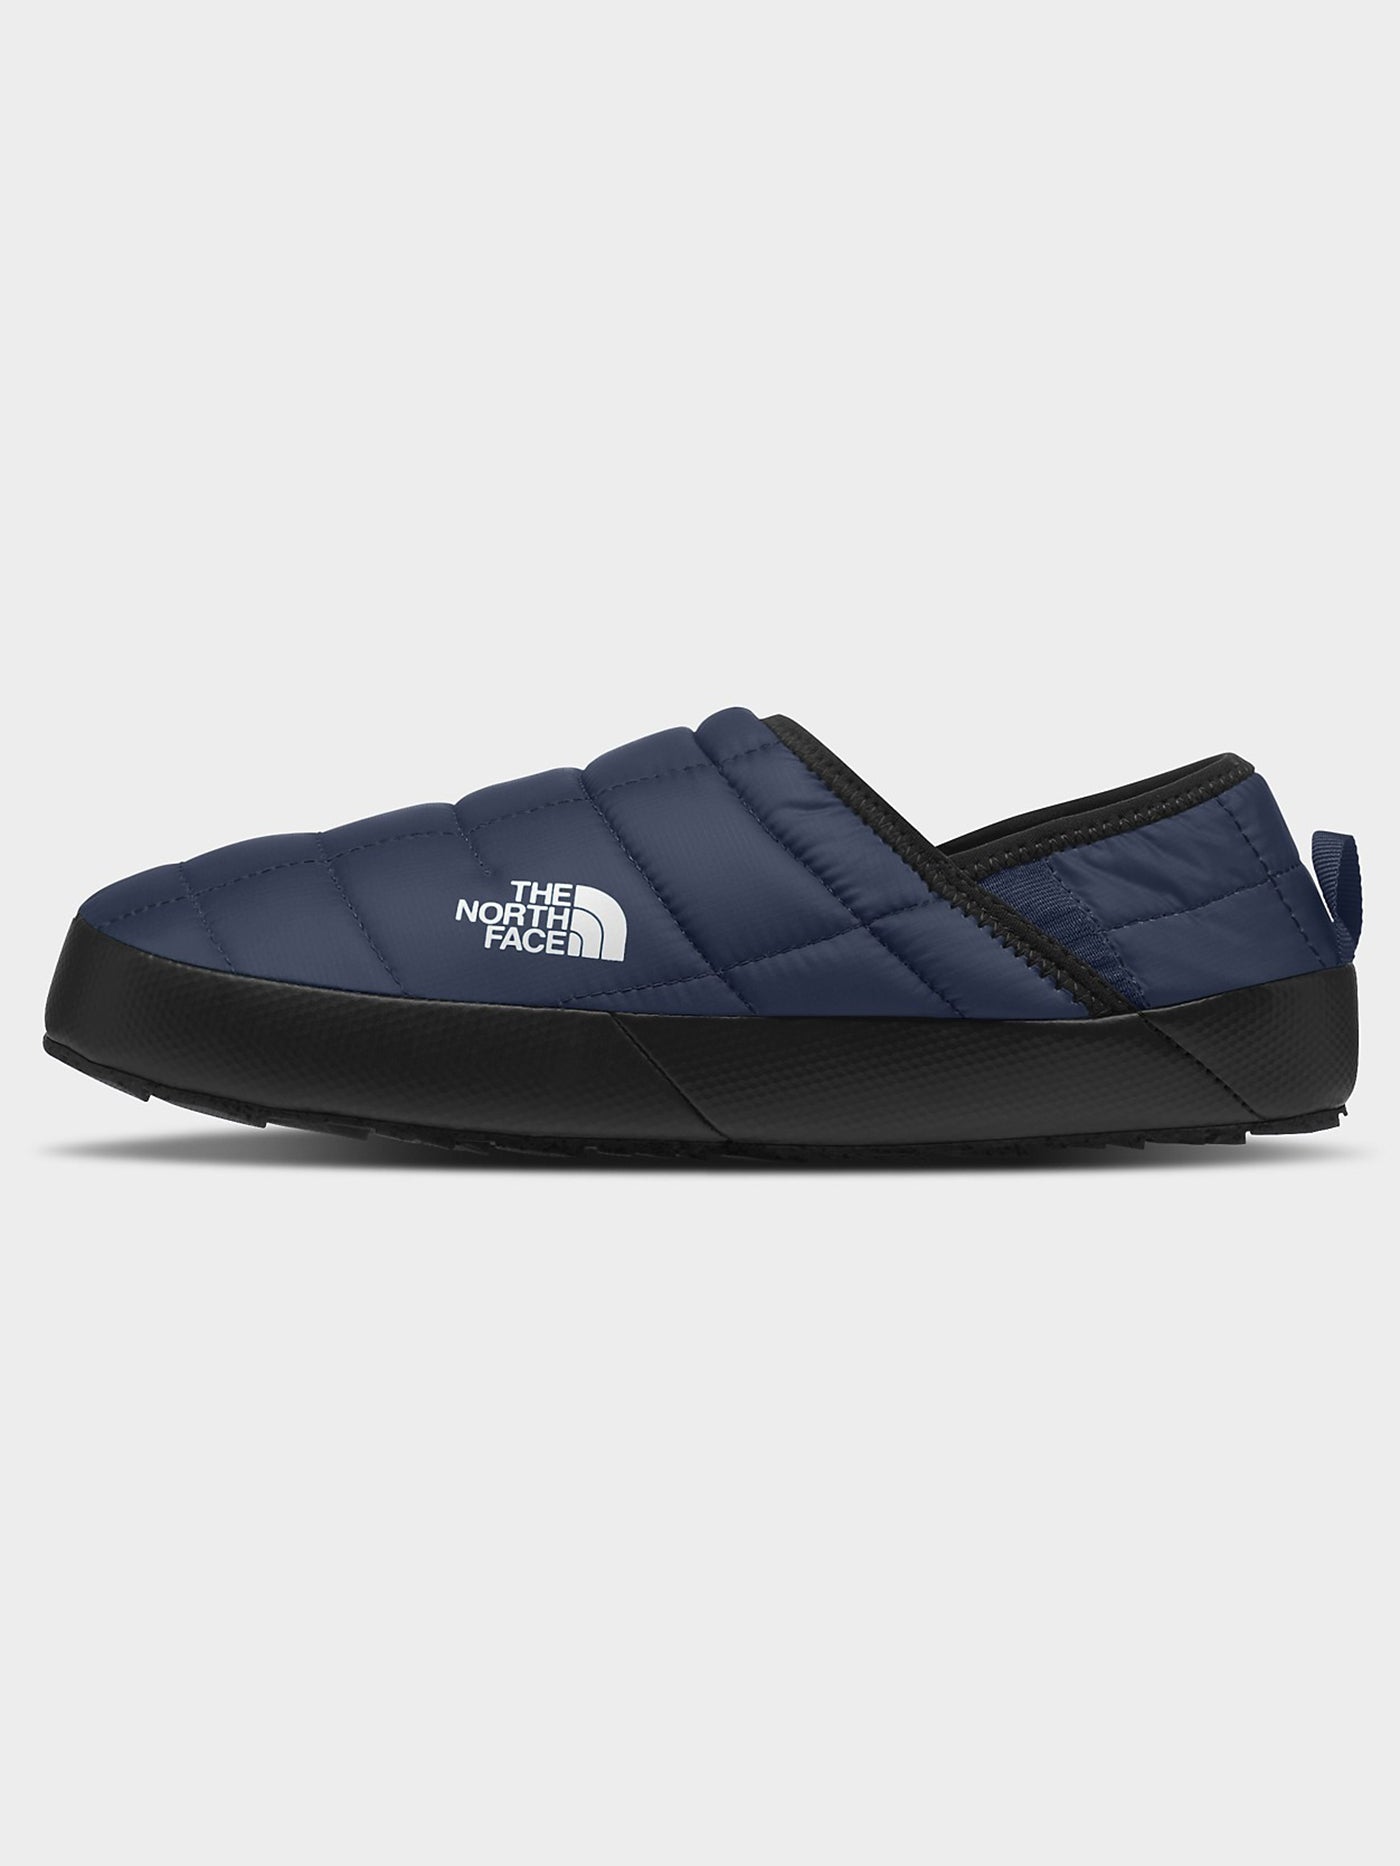 The North Face Thermoball Traction Mule V Shoes